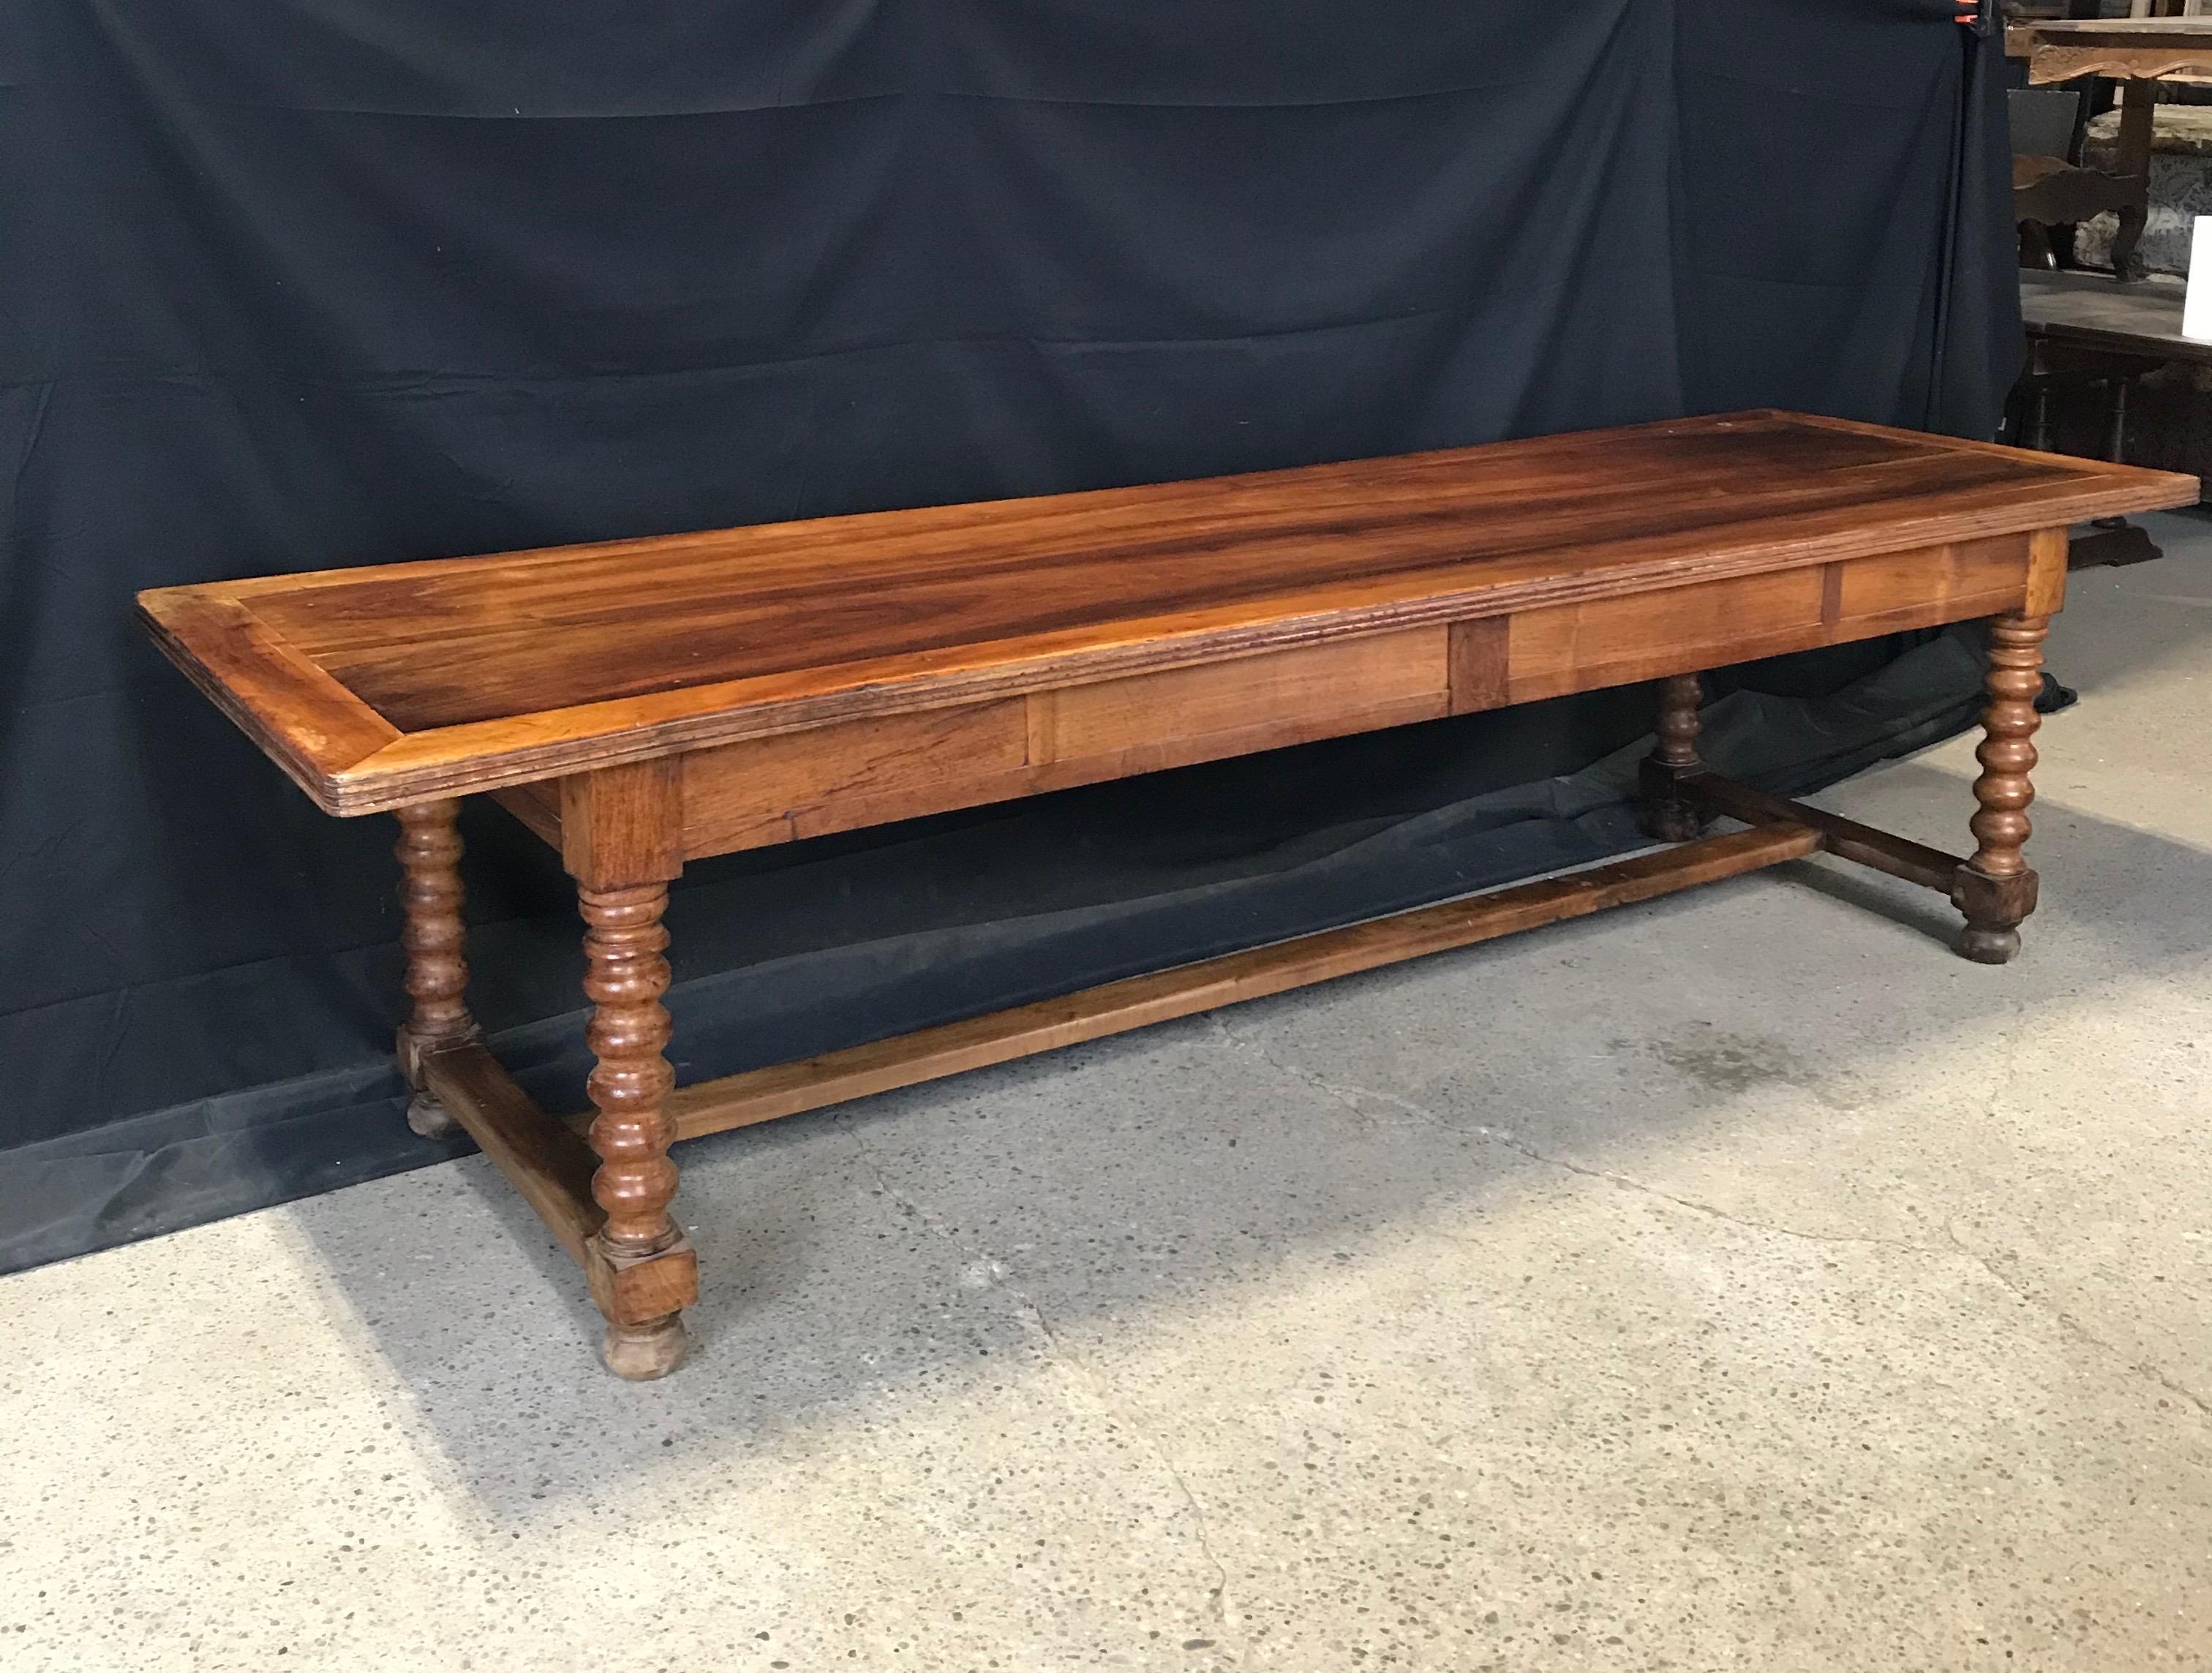 An authentic walnut expansive 9’7” long farmhouse dining table having impressive turned and carved twist legs, two drawers, and can seat up to 12. Condition: Expected surface wear and signs of use including some light surface scratching and sporadic